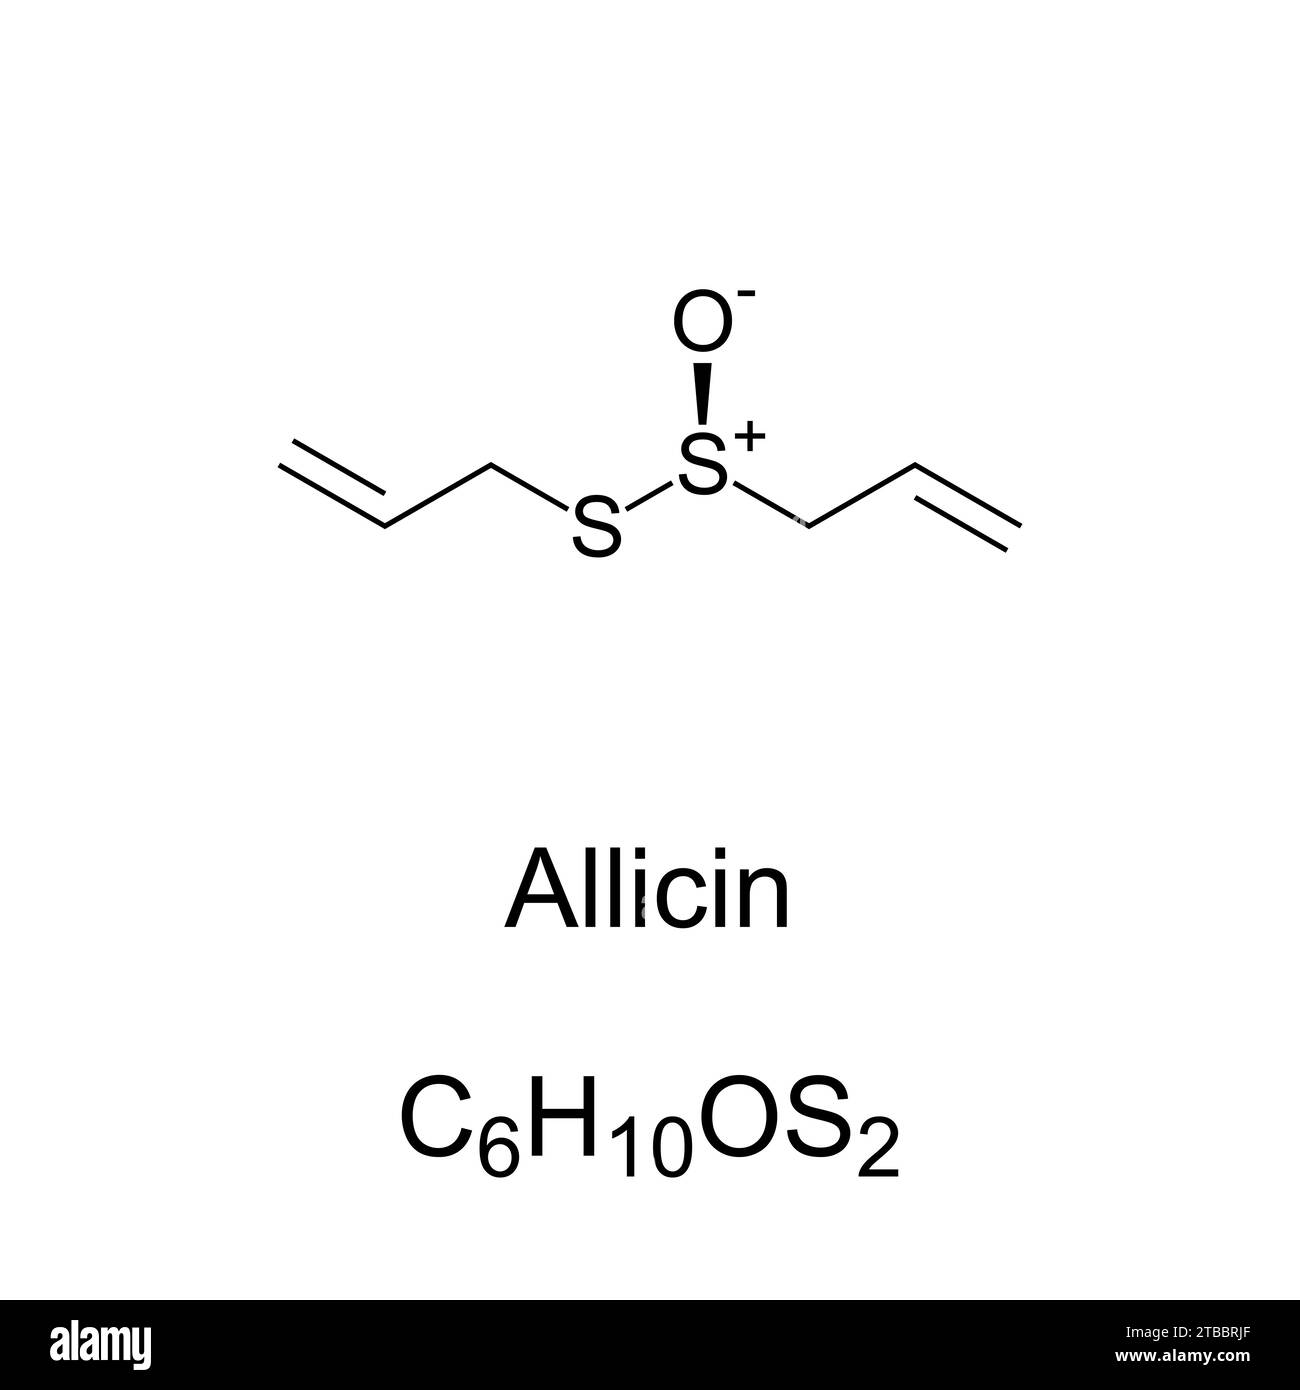 Allicin, chemical formula and structure. Organosulfur compound obtained from garlic. Chopping or crushing fresh garlic converts alliin into allicin. Stock Photo